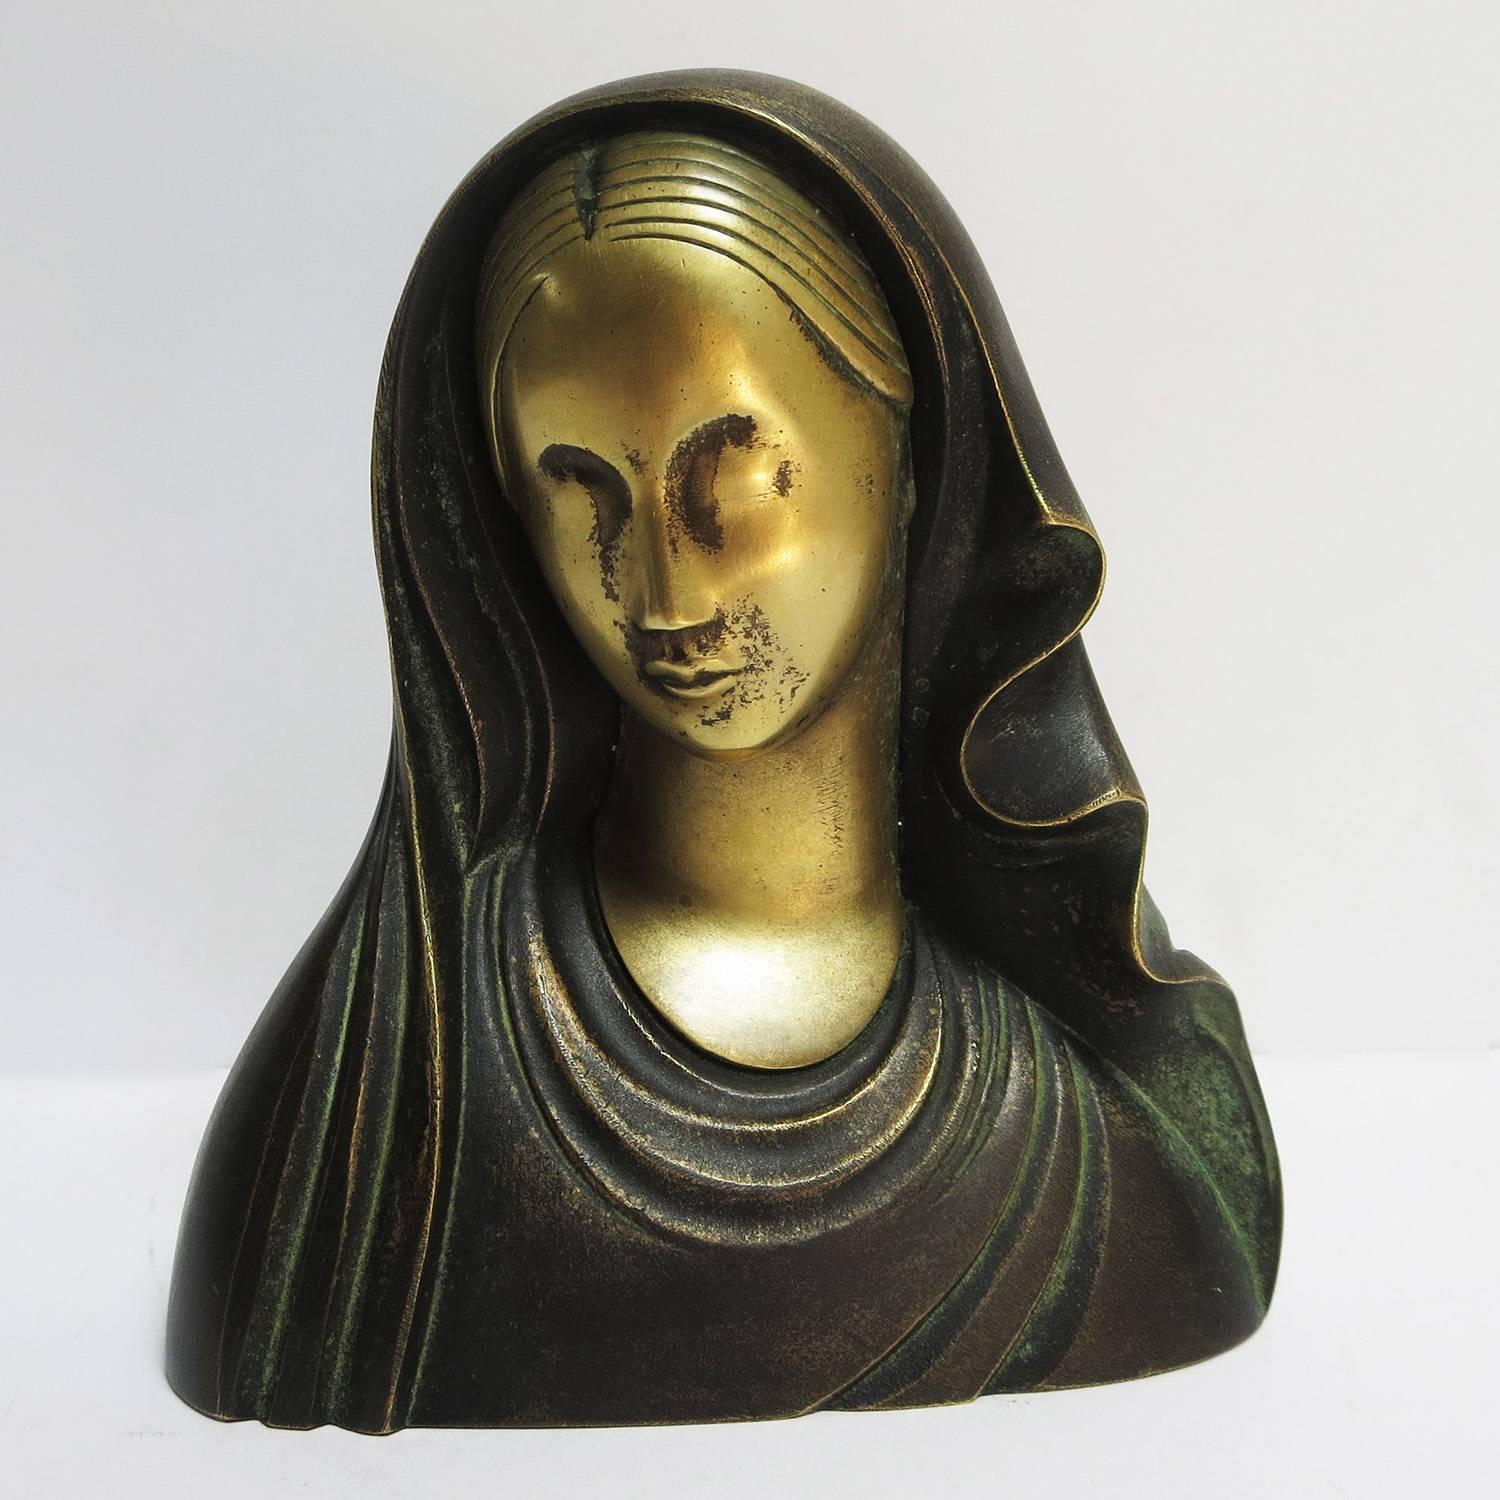 This lovely sculpture in created in two parts. The face is a brass tone, while the clothing is a darker patina finish. The base is wooden, and marked 